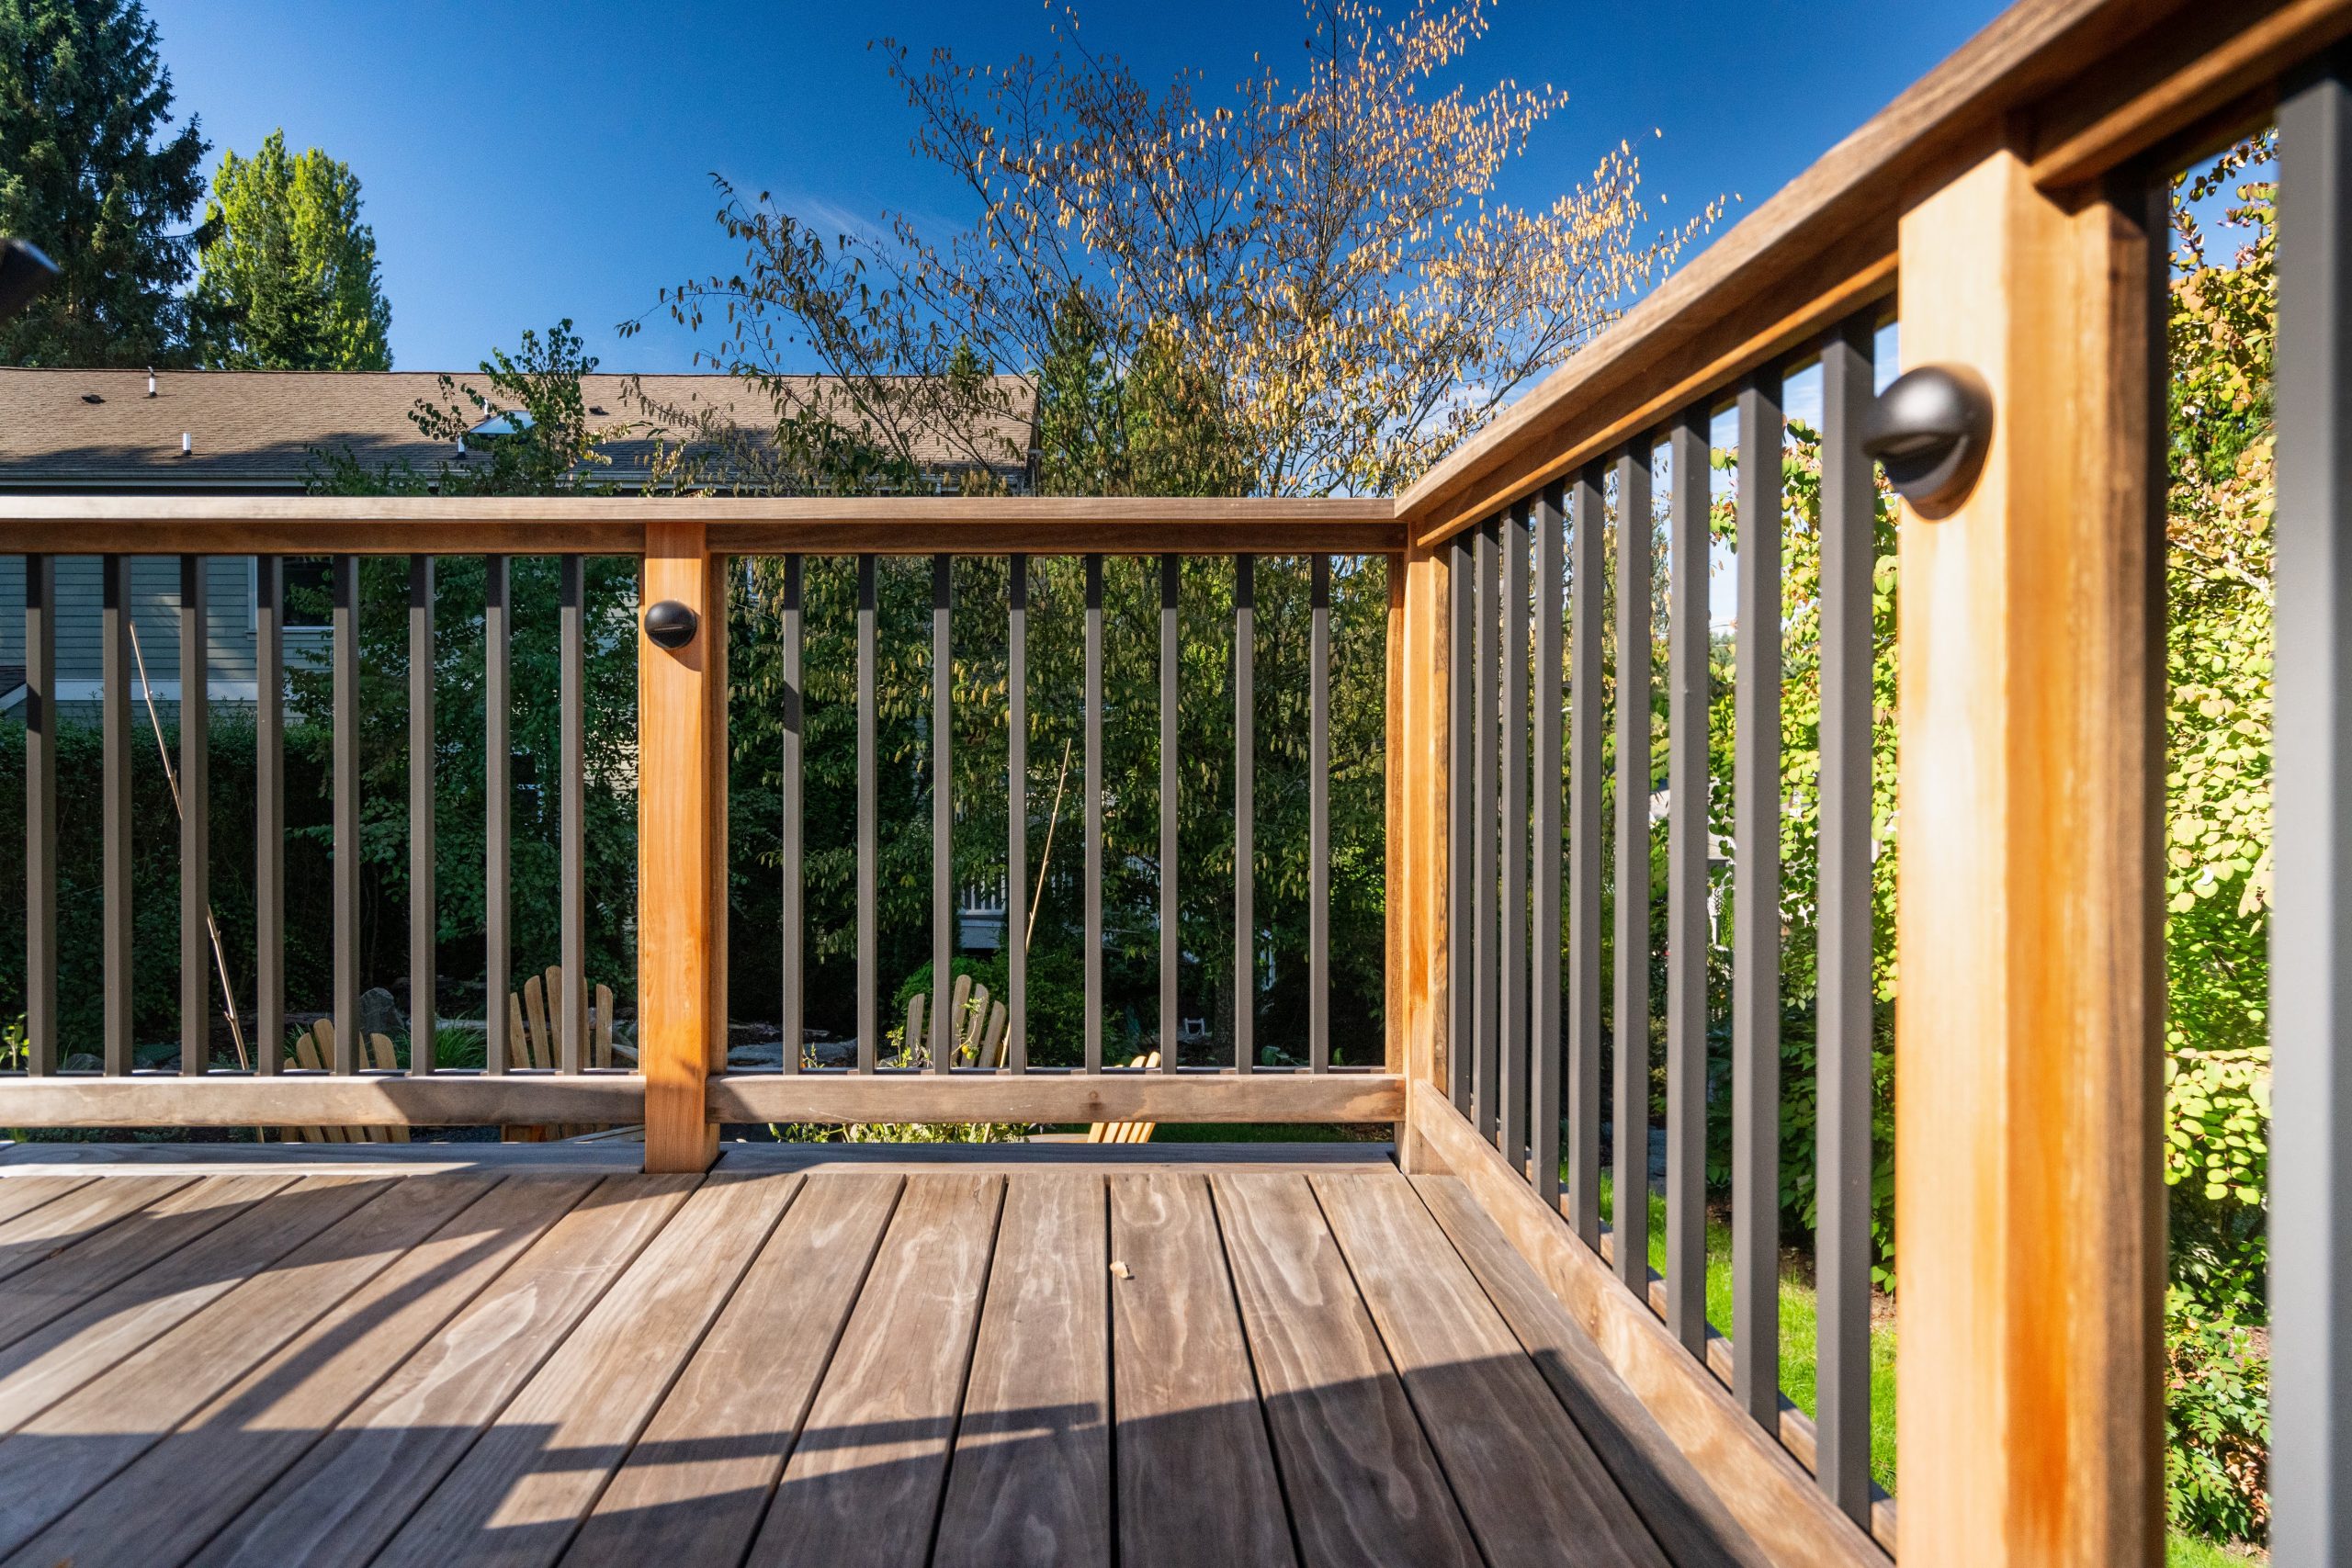 View of the back patio deck featuring Kebony Modified Wood Clear Decking at this residential project in Seattle, Washington with trees in the background on a sunny day